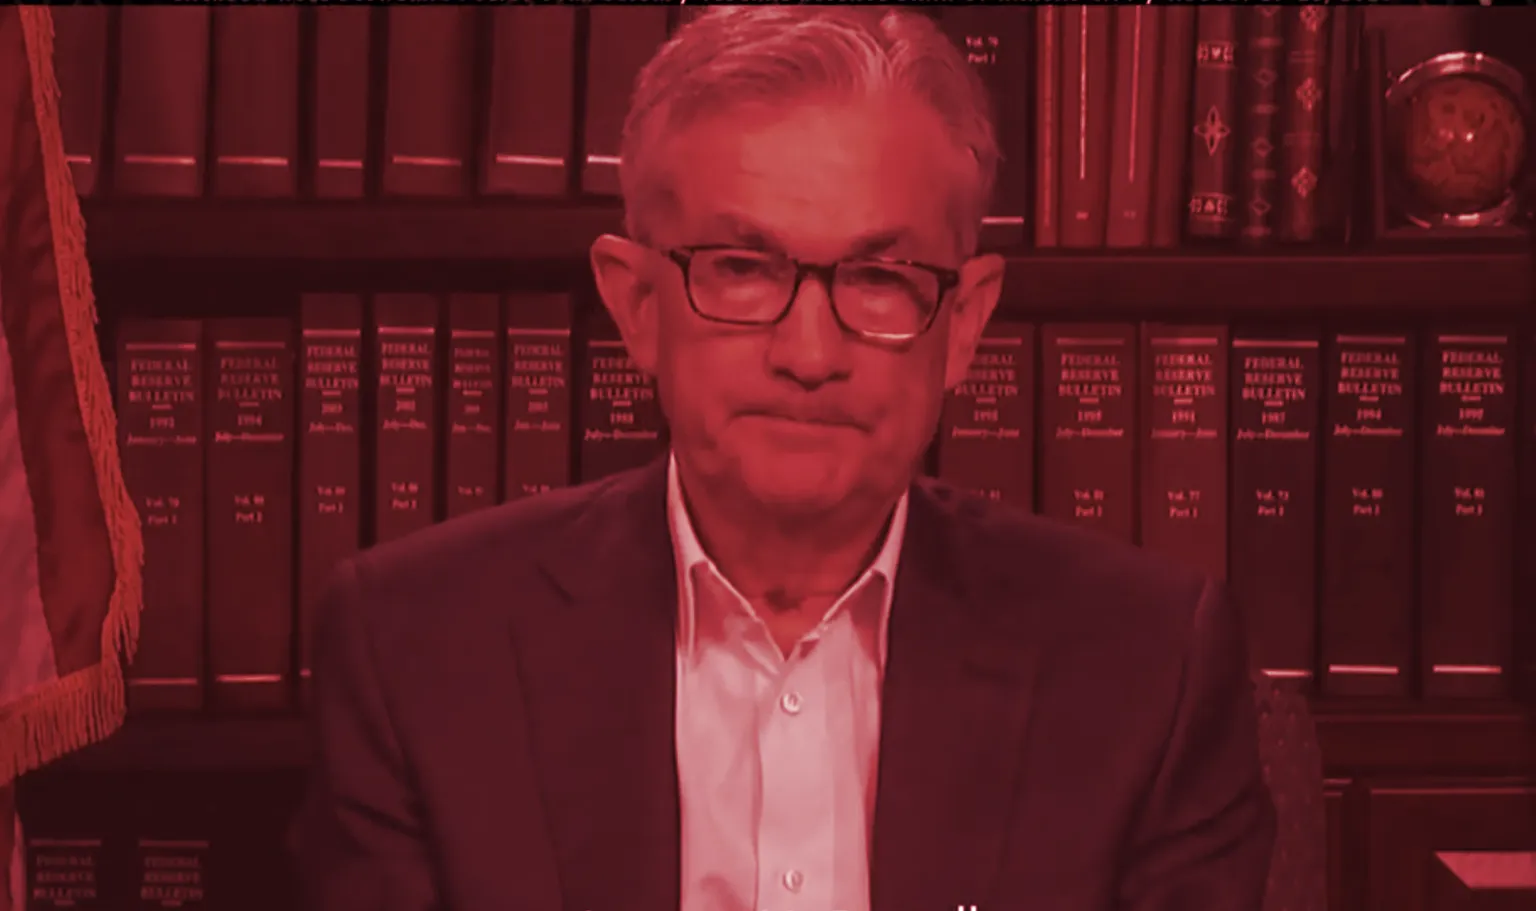 Fed Chair Jerome Powell speaking at Jackson Hole. Image: YouTube